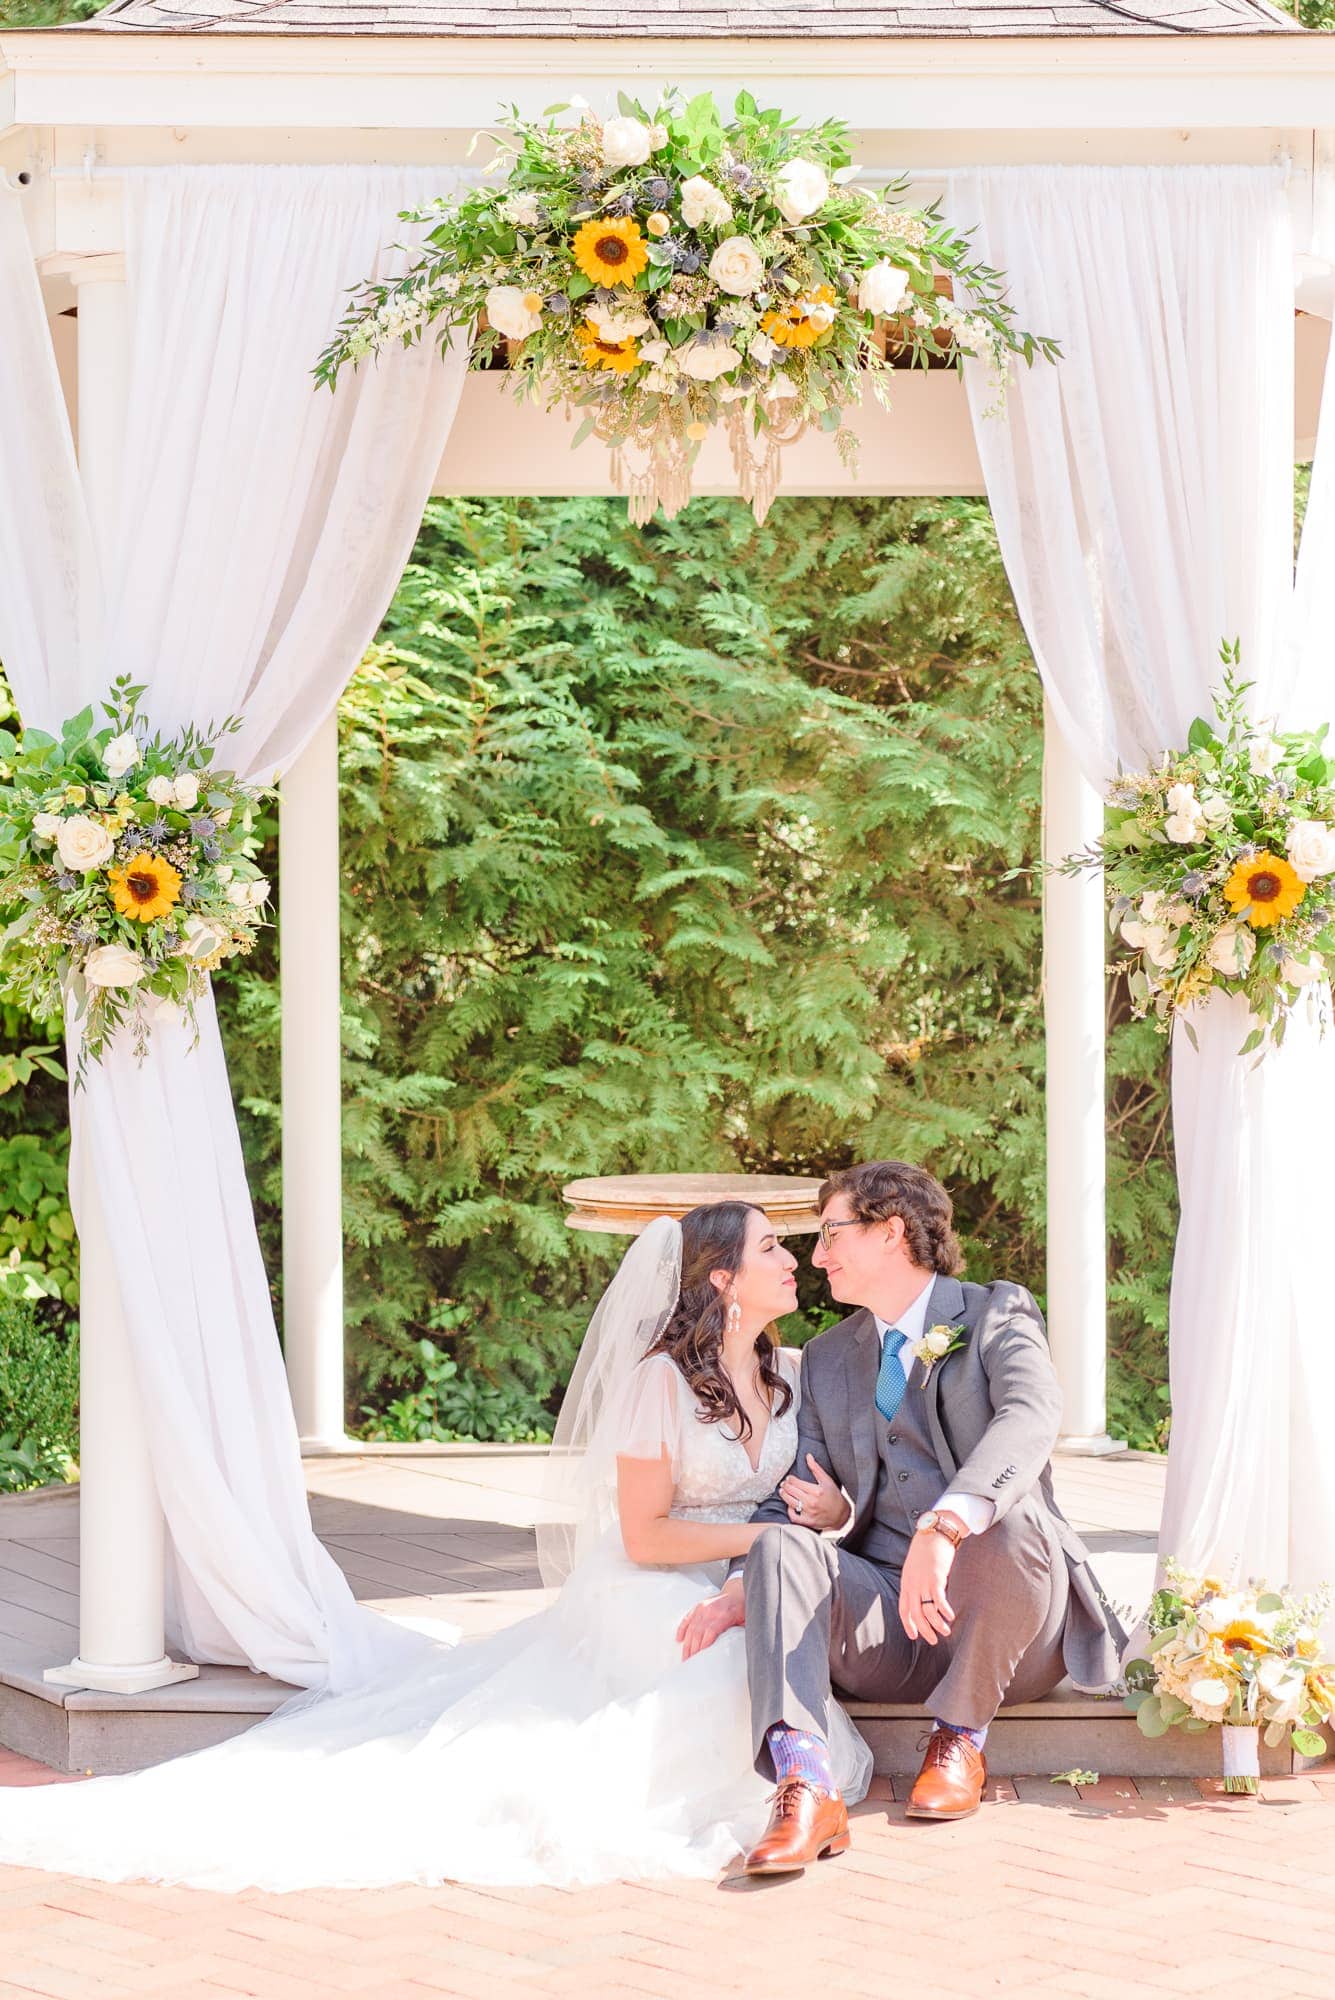 Natalie and Tommy take a quiet moment together under the gazebo arch at Alexander Homestead.